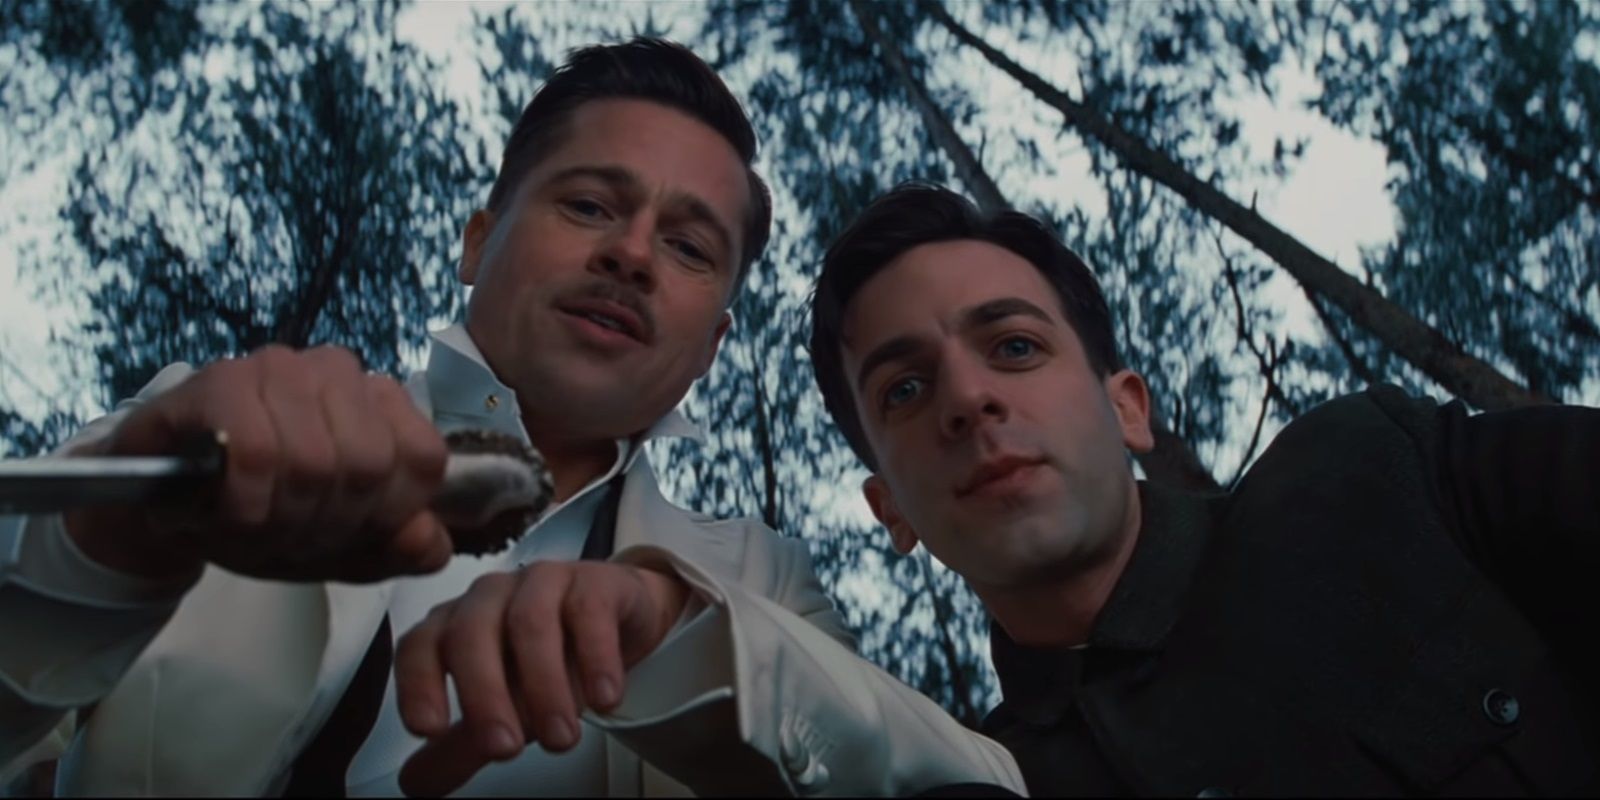 Two men looking down at someone offscreen in Inglourious Basterds.